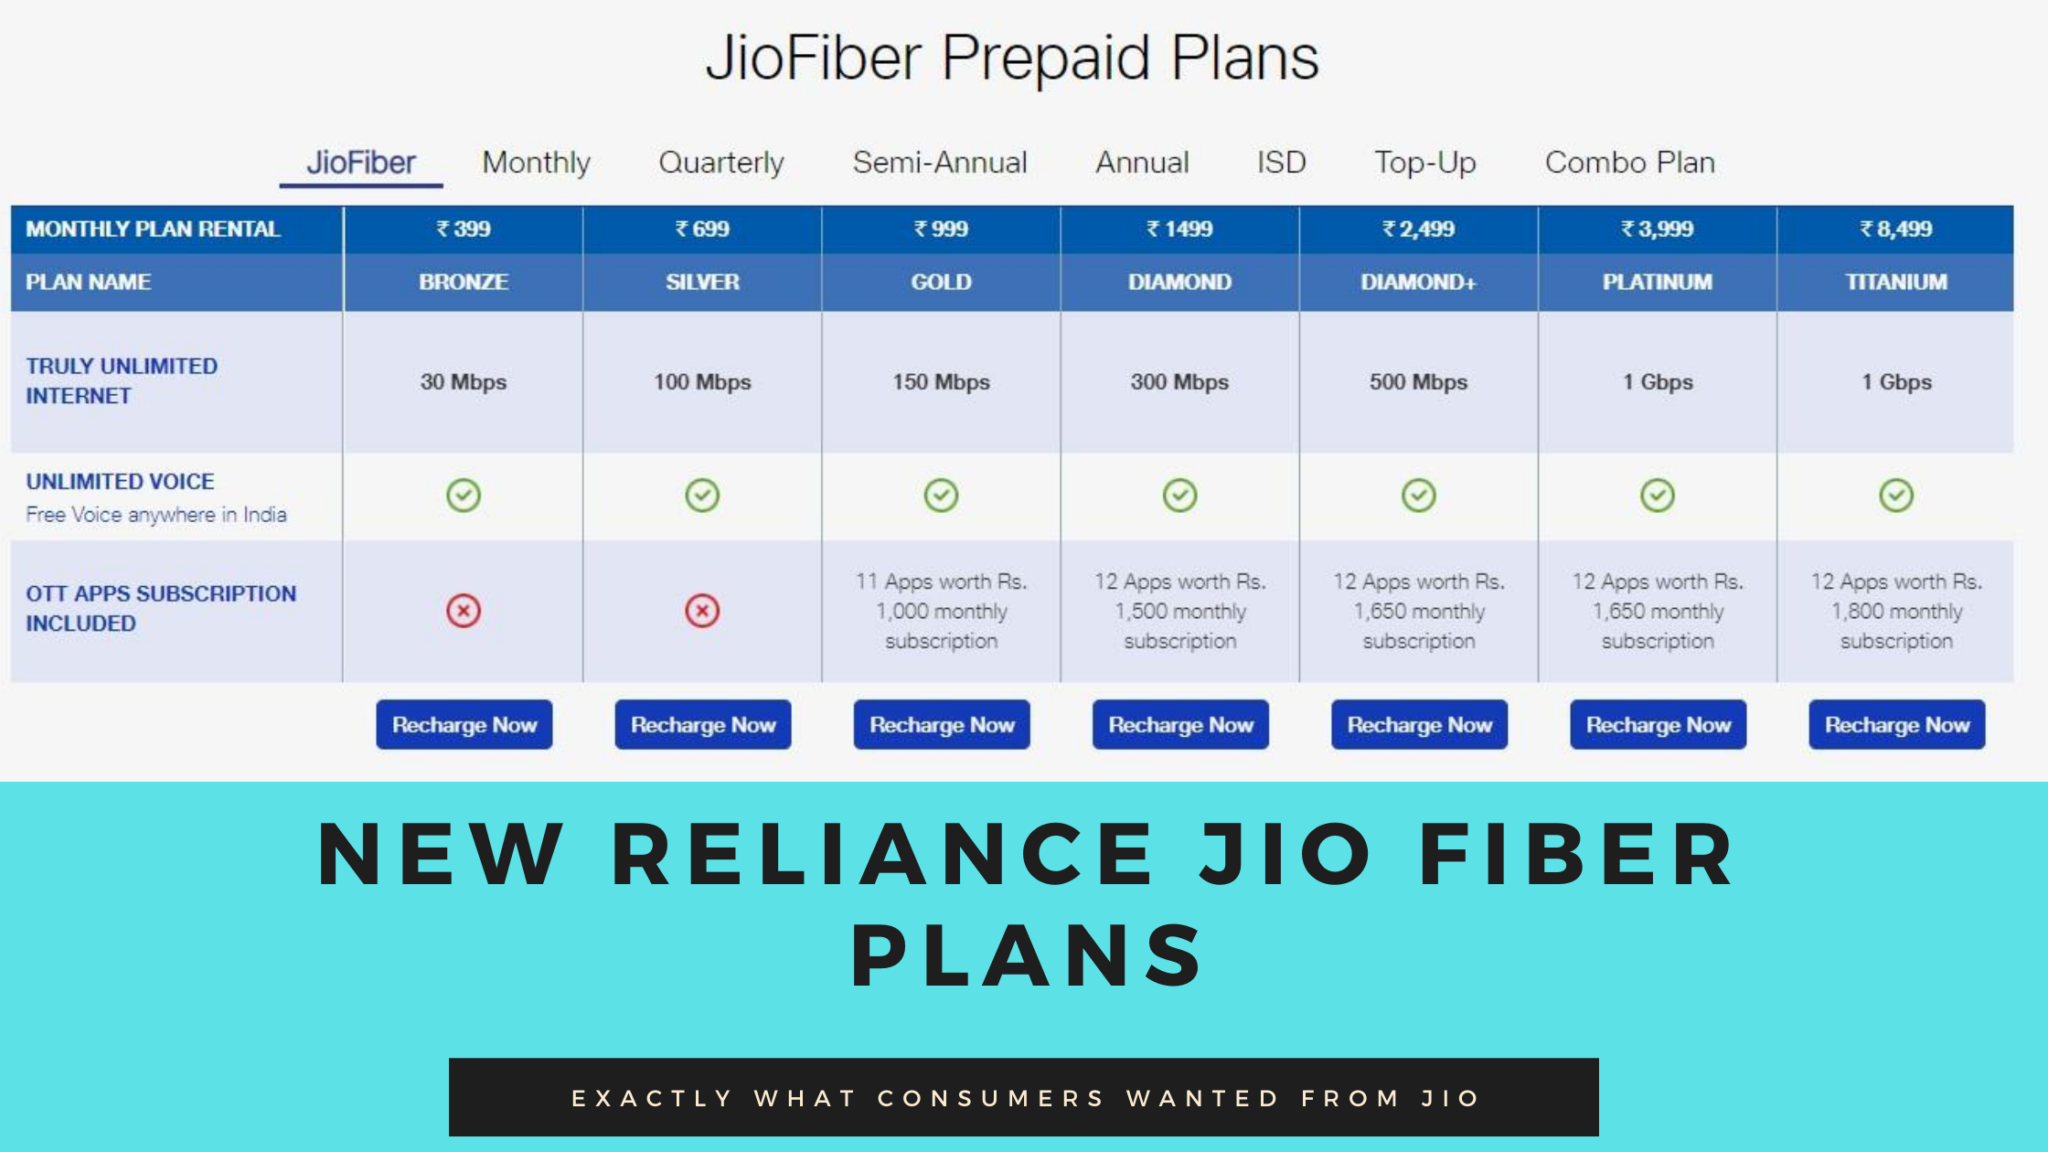 New Reliance Jio Fiber Plans are exactly what consumers expected when it was first launched